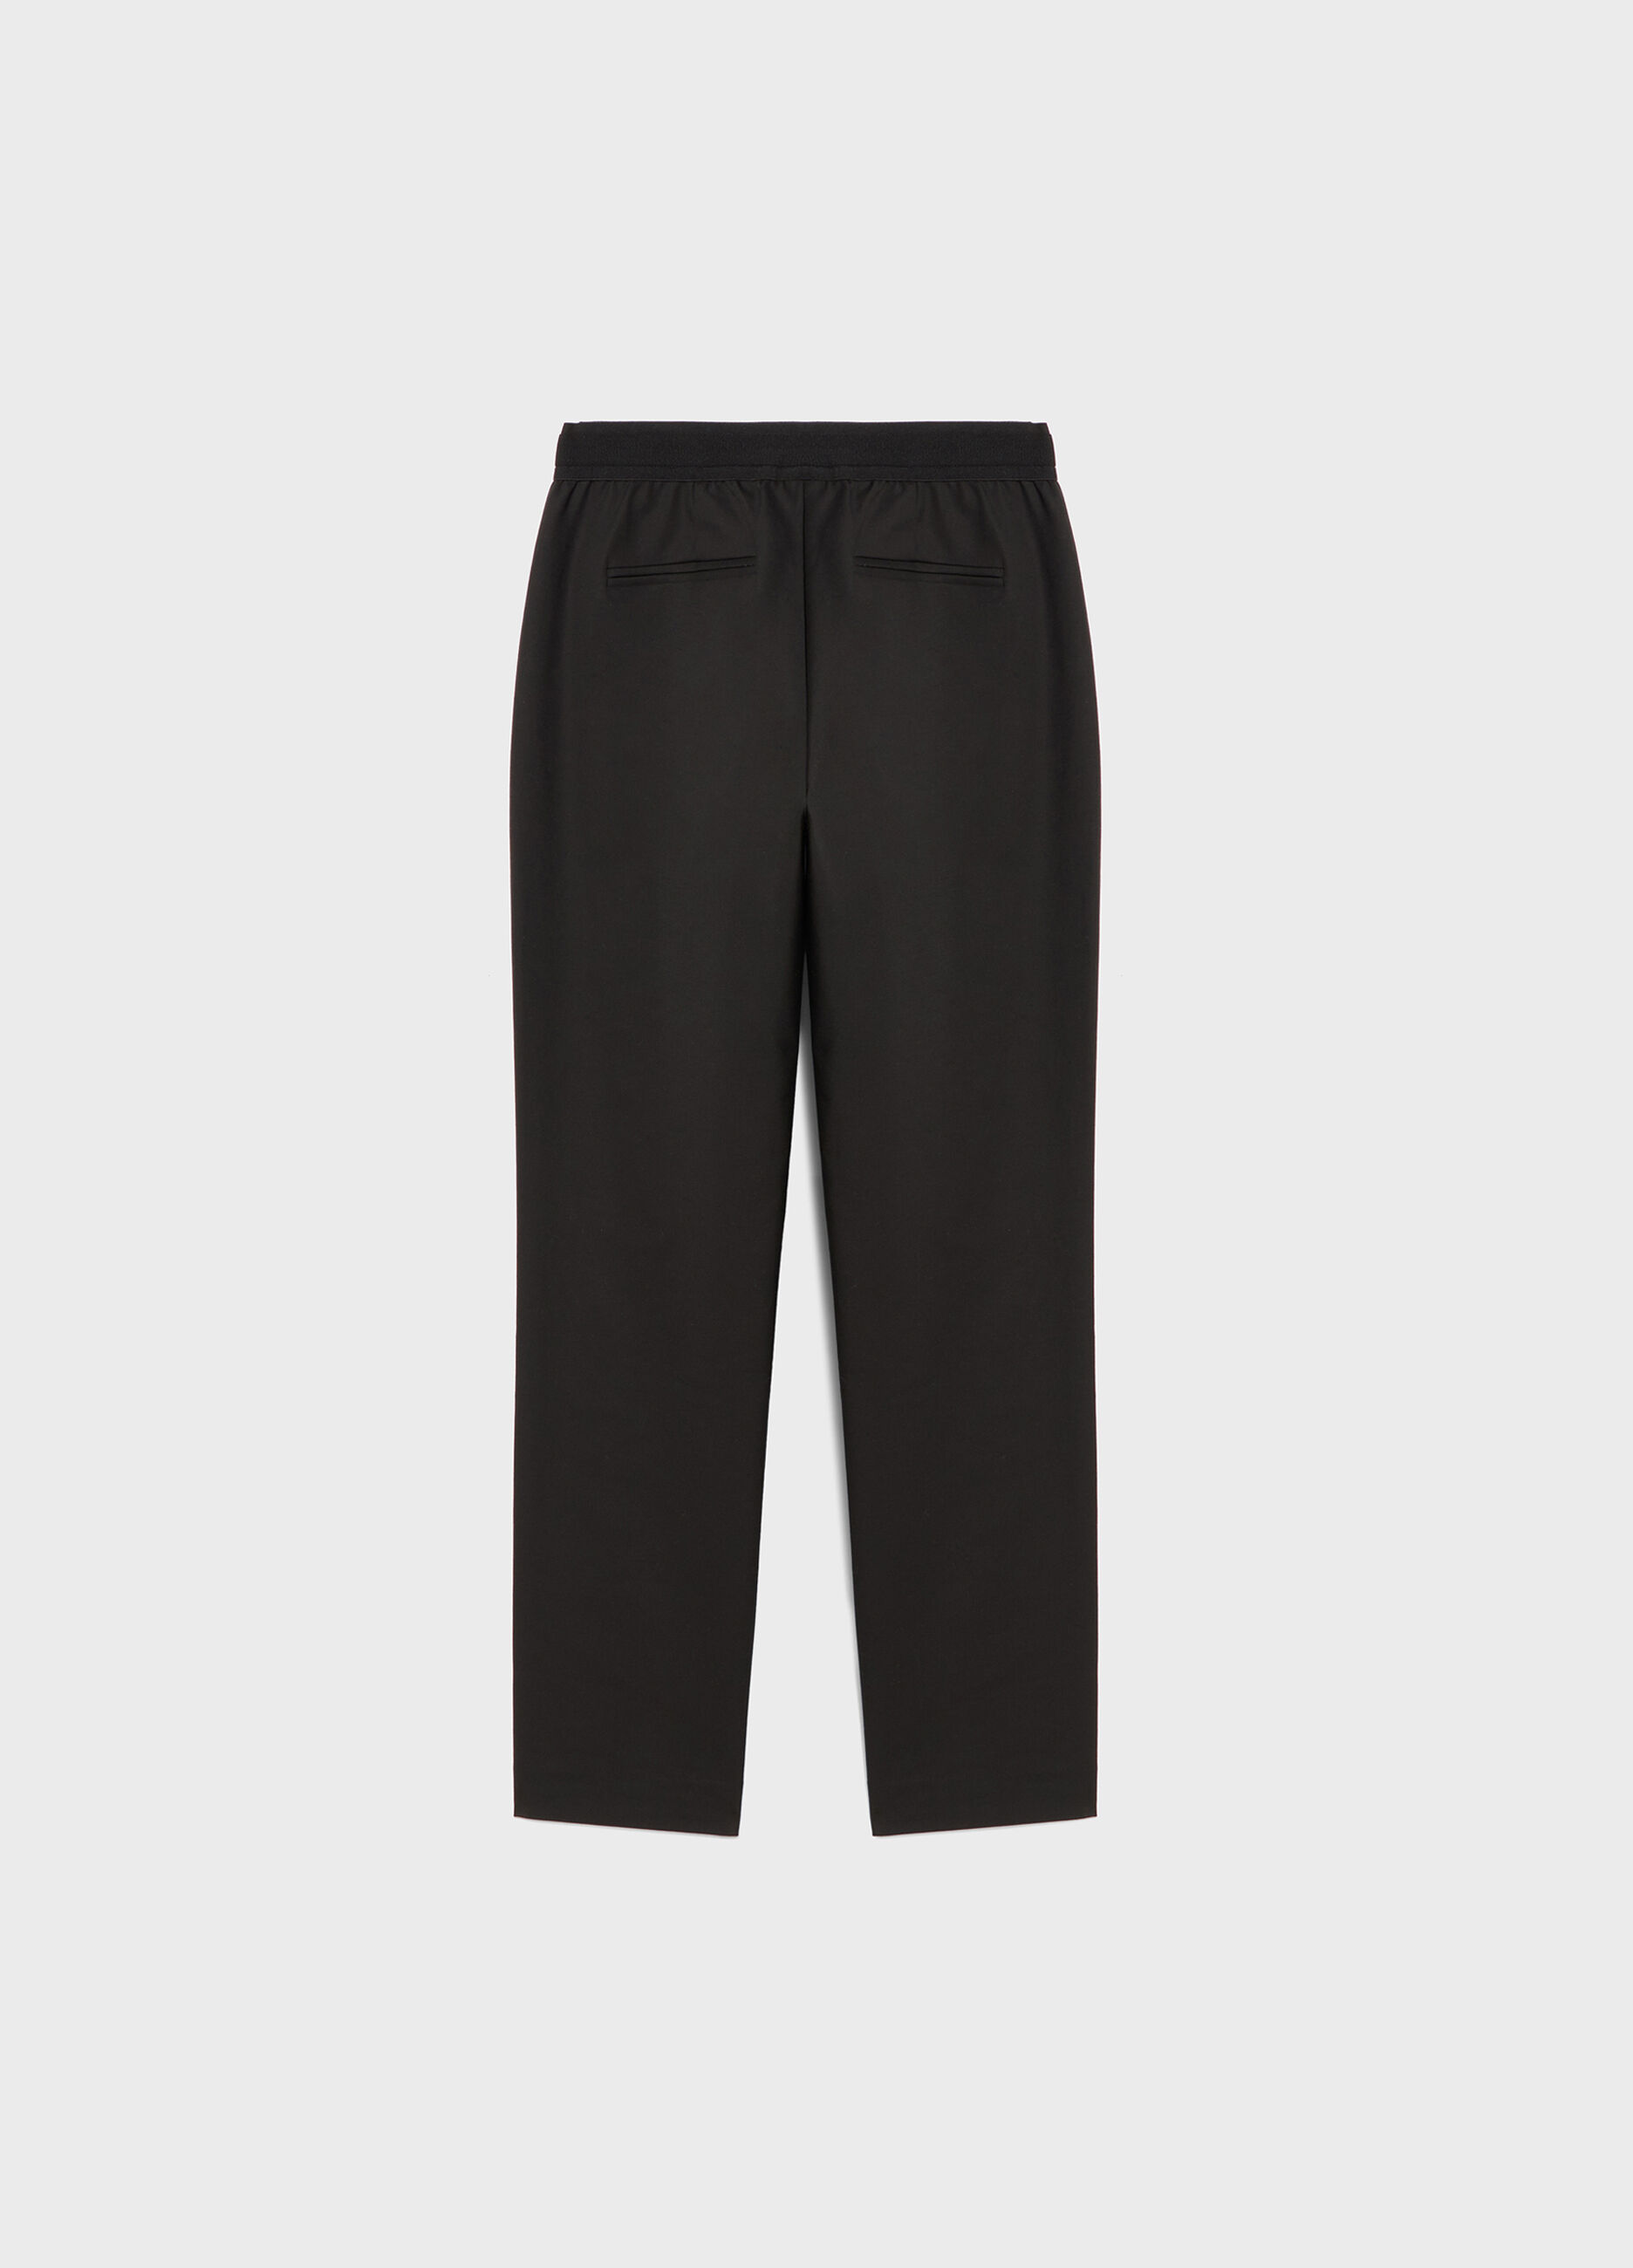 Black cigarette trousers with elastic